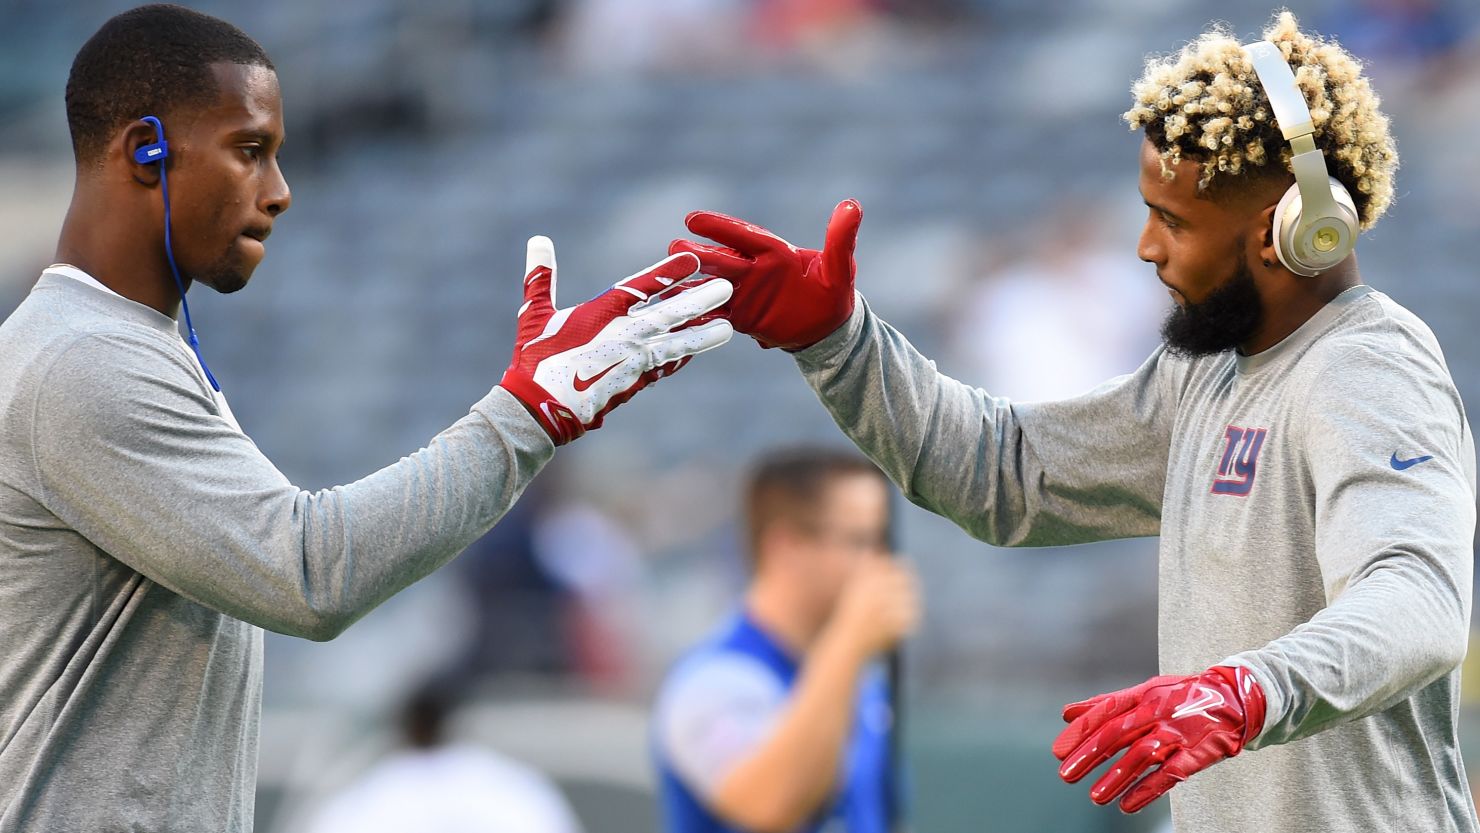 Wide receivers Victor Cruz (L) and Odell Beckham of the New York Giants engaged in a choreographed pregame handshake, one of many rituals which NFL players will embrace throughout the season.